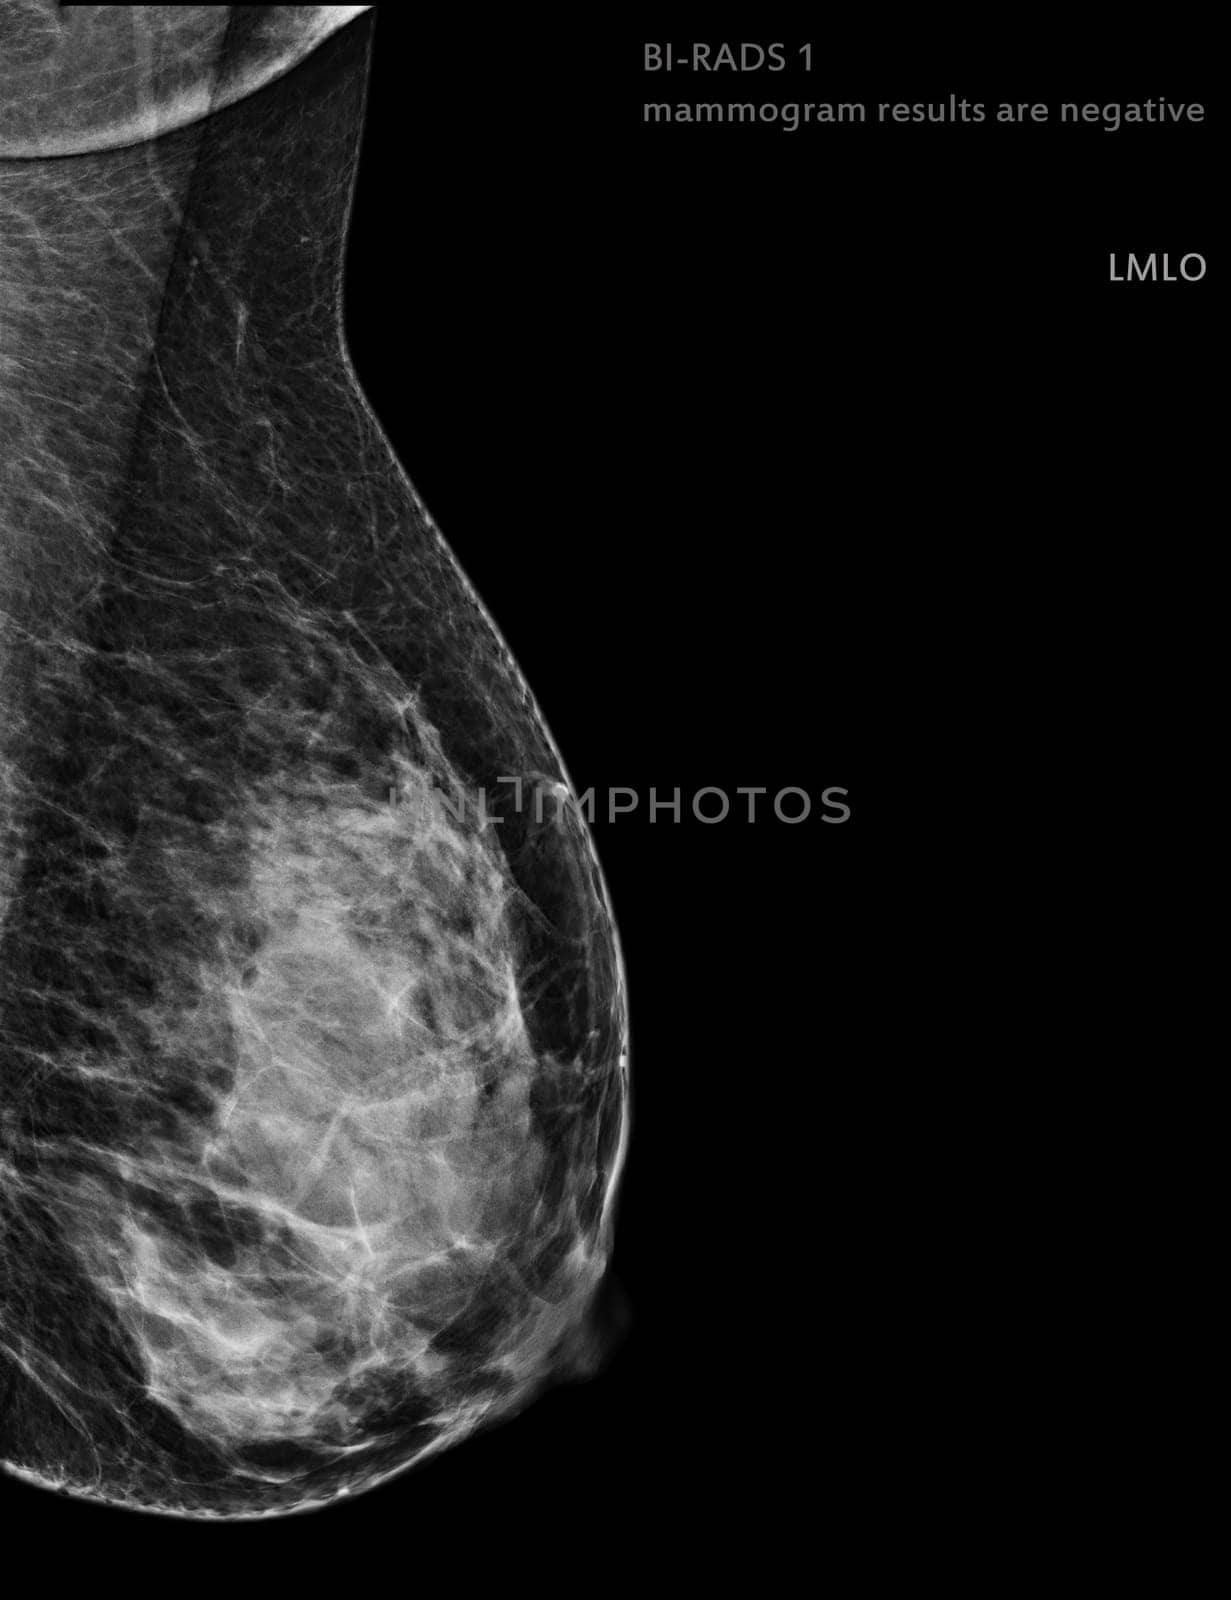  X-ray Digital Mammogram Right side MLO view . mammography or breast scan for Breast cancer BI-RADS 1 mammogram results are negative.